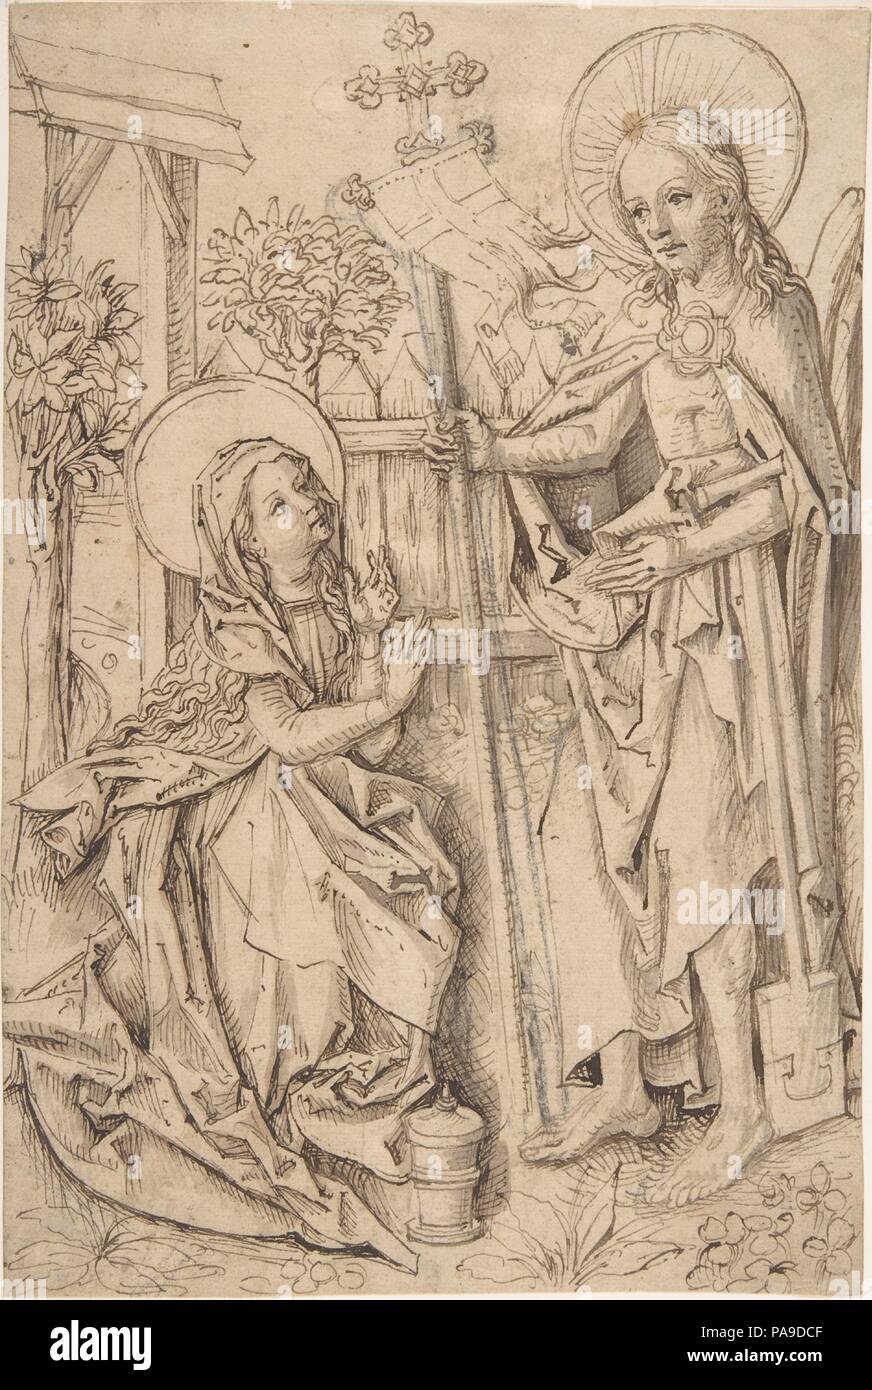 Christ Appearing to Mary Magdalen. Artist: Master of the Drapery Studies (German, Strasbourg, ca. 1470-1500). Dimensions: 9 7/8 x 6 5/8 in.  (25.1 x 16.8 cm). Former Attribution: Formerly attributed to Anonymous, German. Date: ca. 1490.  Although the artist nicknamed the 'Master of the Coburg Roundels' has not yet been identified by name, it is clear from his surviving stained-glass windows and drawings that he was a critical figure in Upper Rhenish art during the last quarter of the fifteenth century and in the history of early German drawing in general.  He was active in Strasbourg, where he Stock Photo